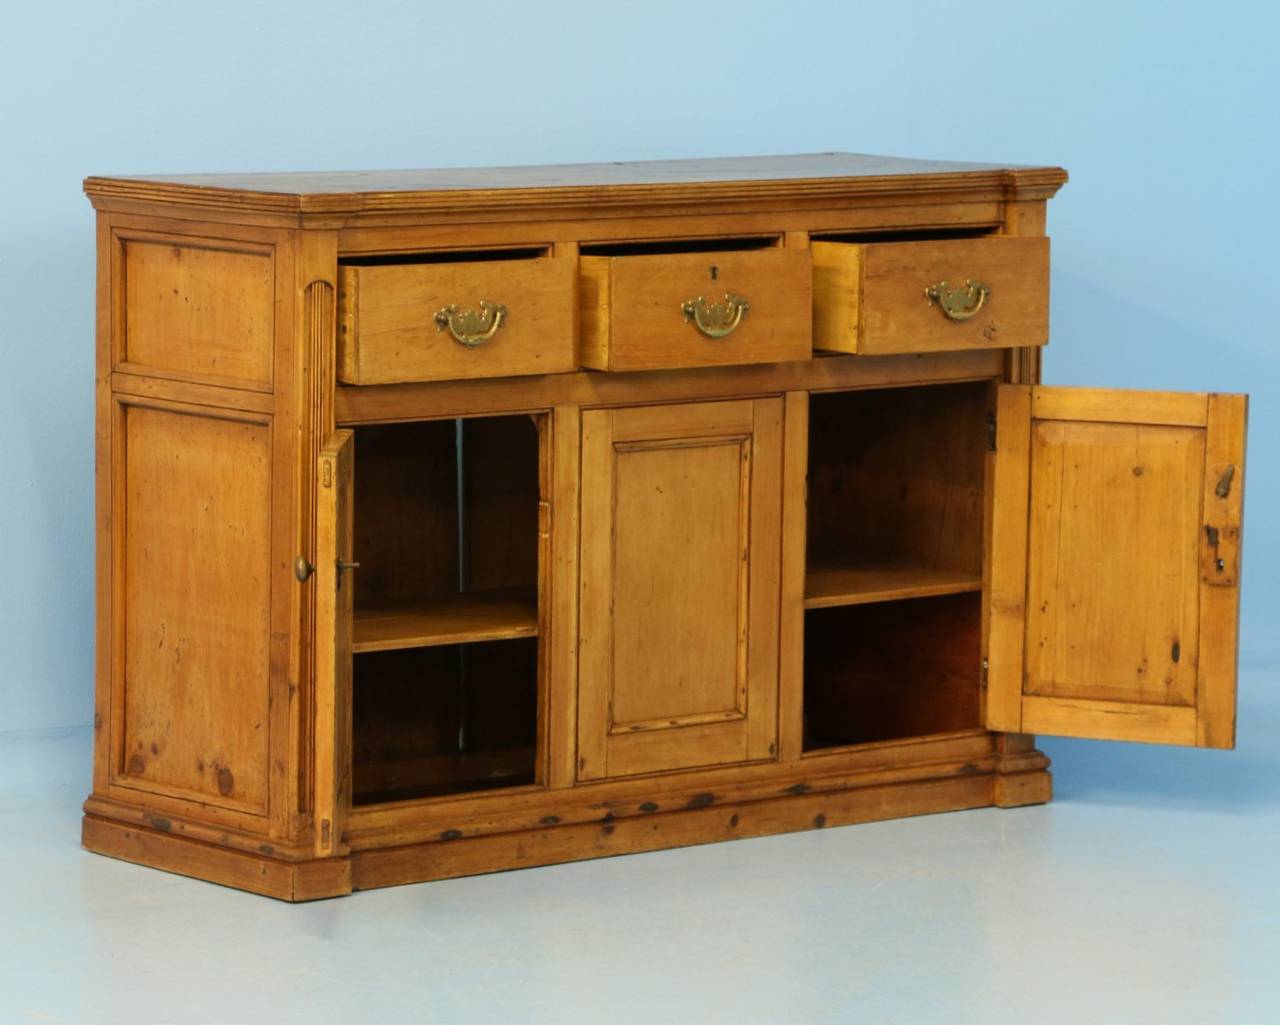 Lovely pine buffet/sideboard with 3 drawers over 2 doors. Note the simple decorative appeal of the door panels and vertical dentil molding/carving along the sides. When the doors are opened you have access to the 